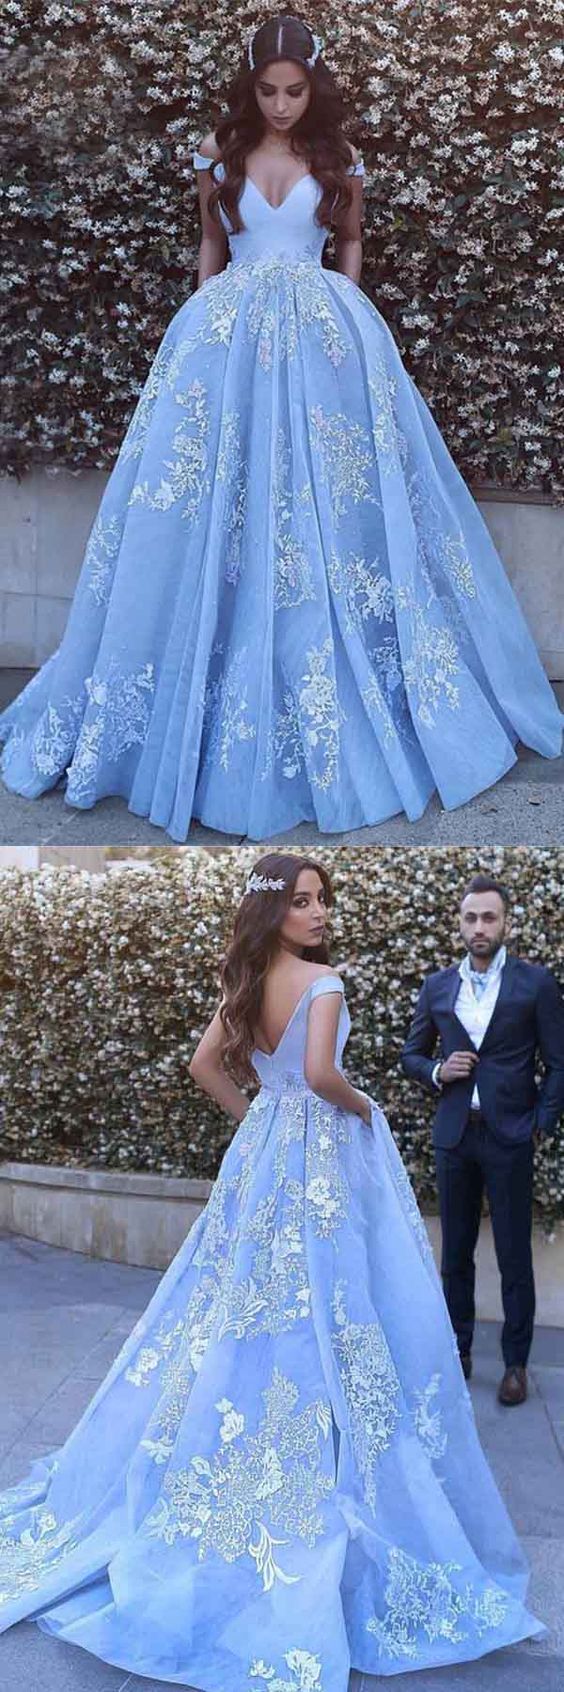 Attractive Ice Blue Ball Gown Lace Wedding Dress